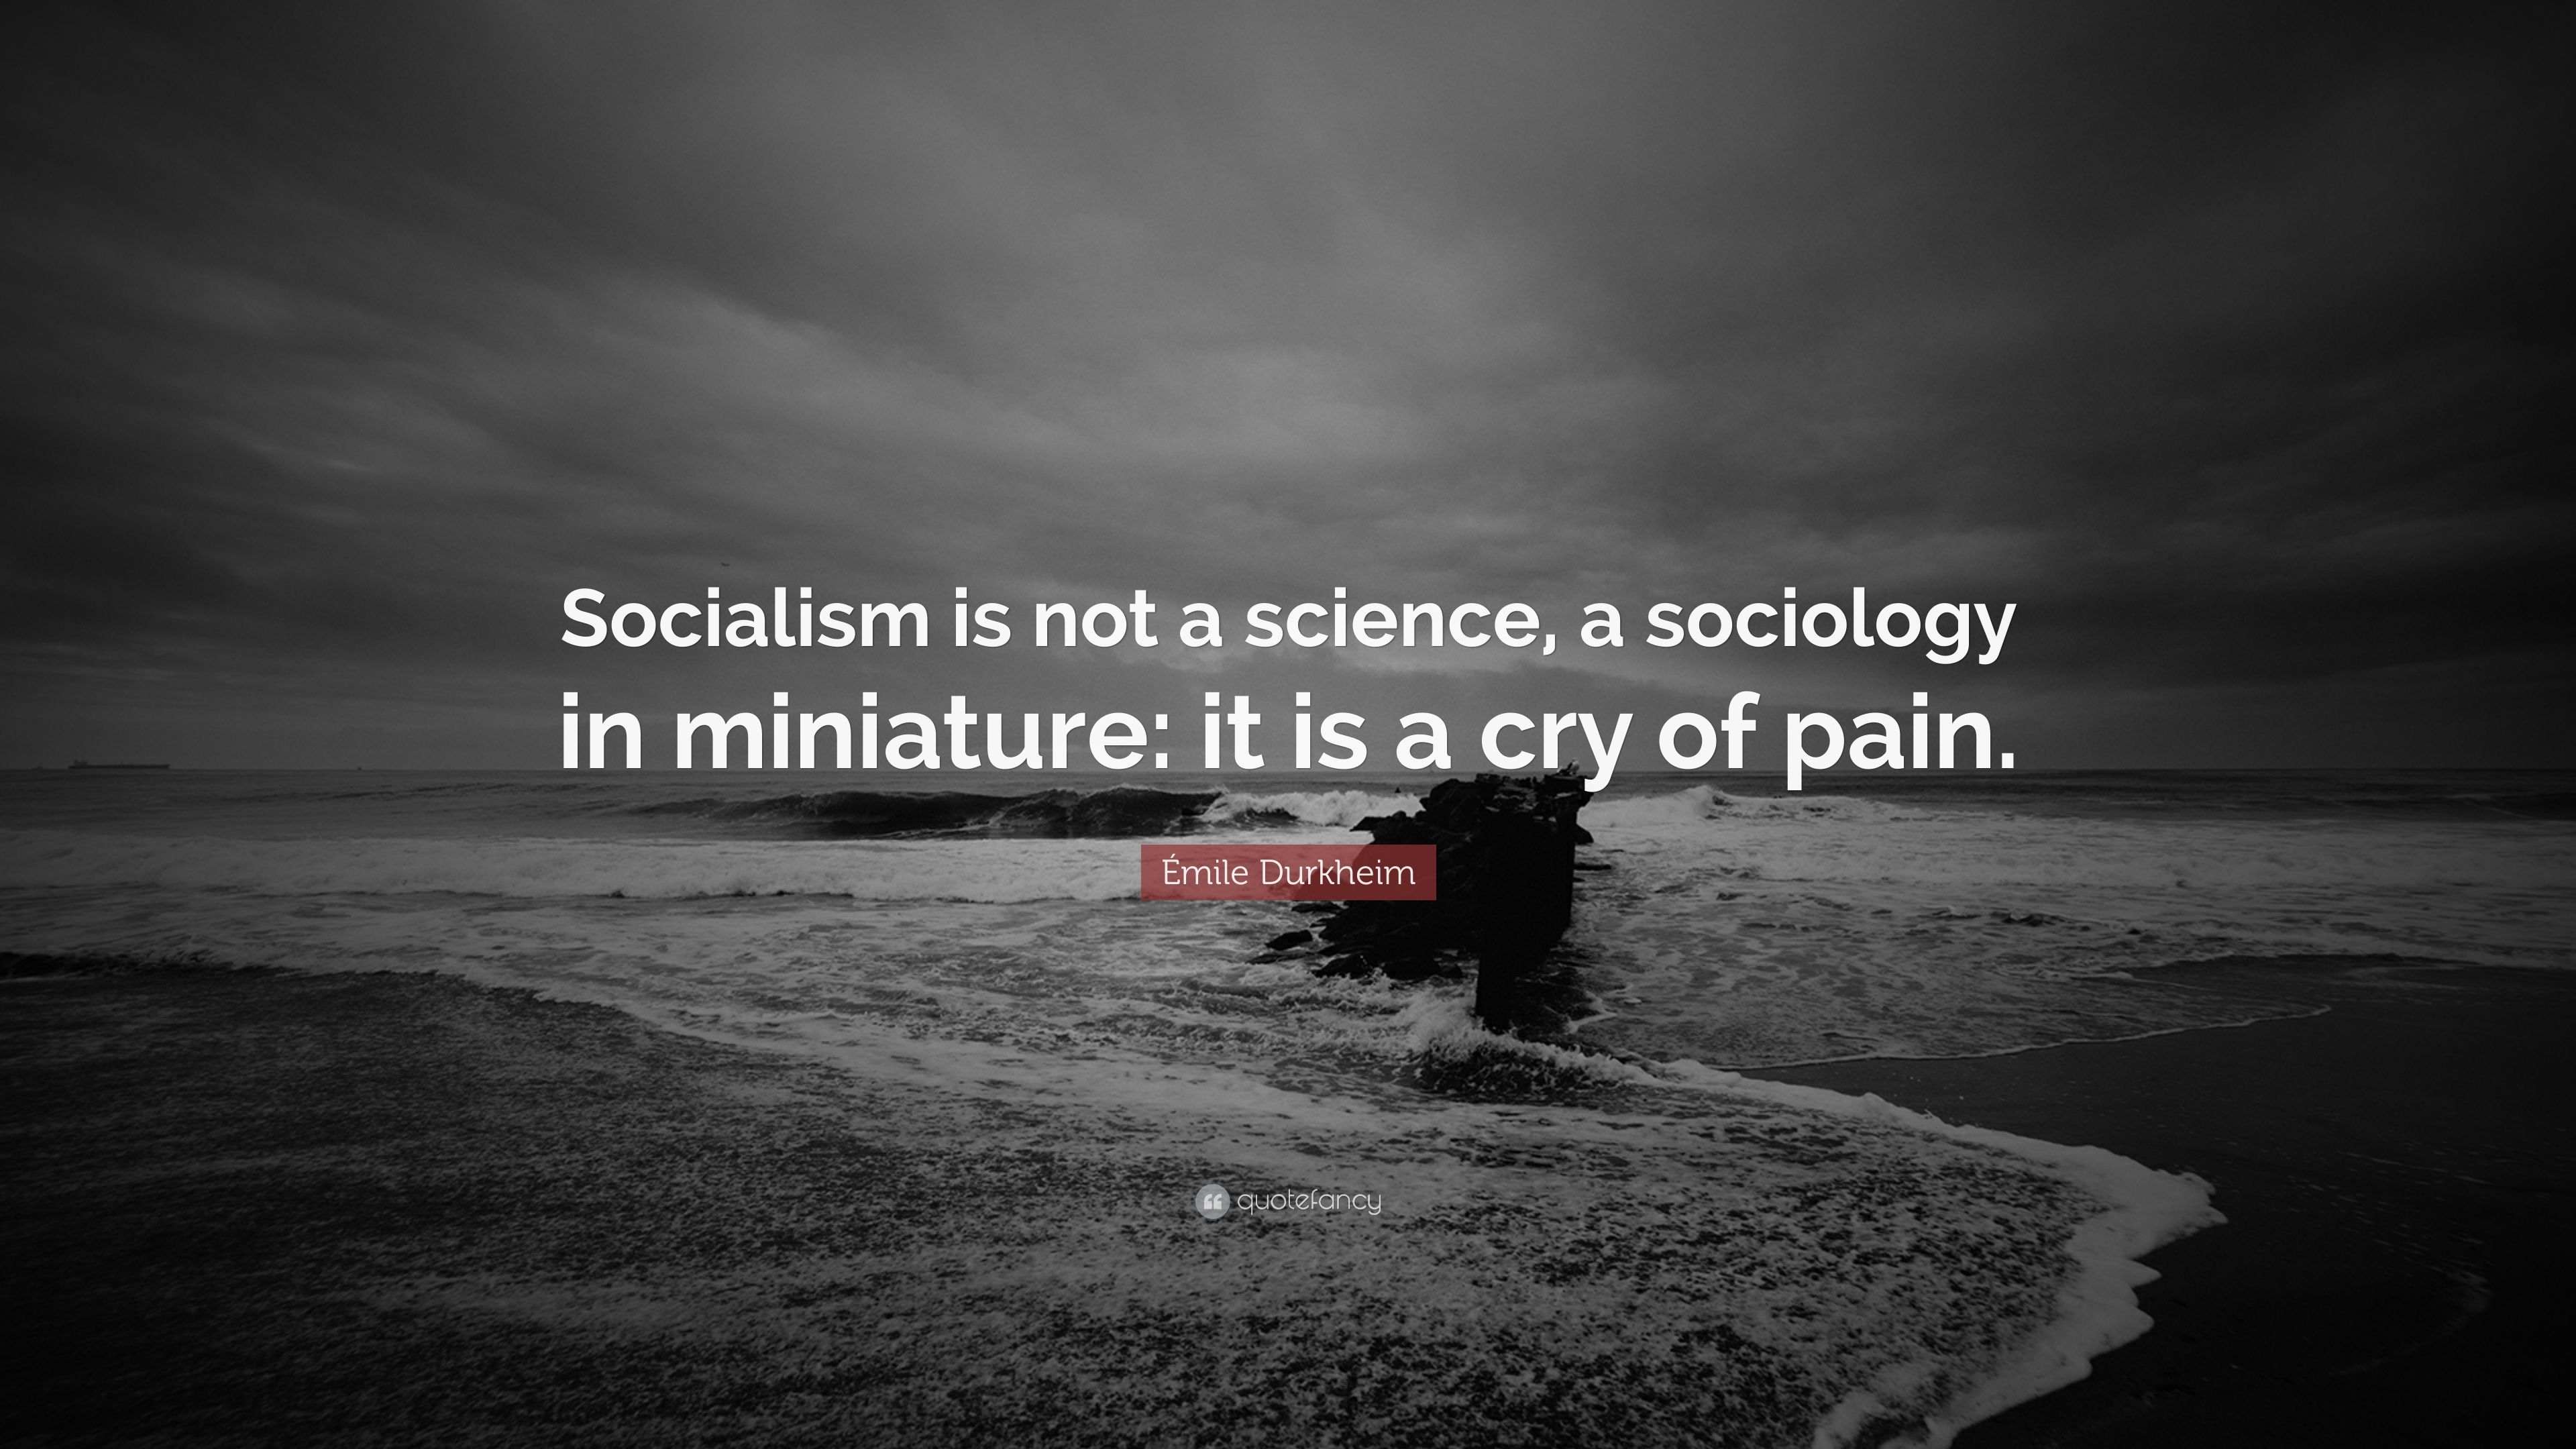 Émile Durkheim Quote: “Socialism is not a science, a sociology in miniature: it is a cry of pain.” (10 wallpaper)